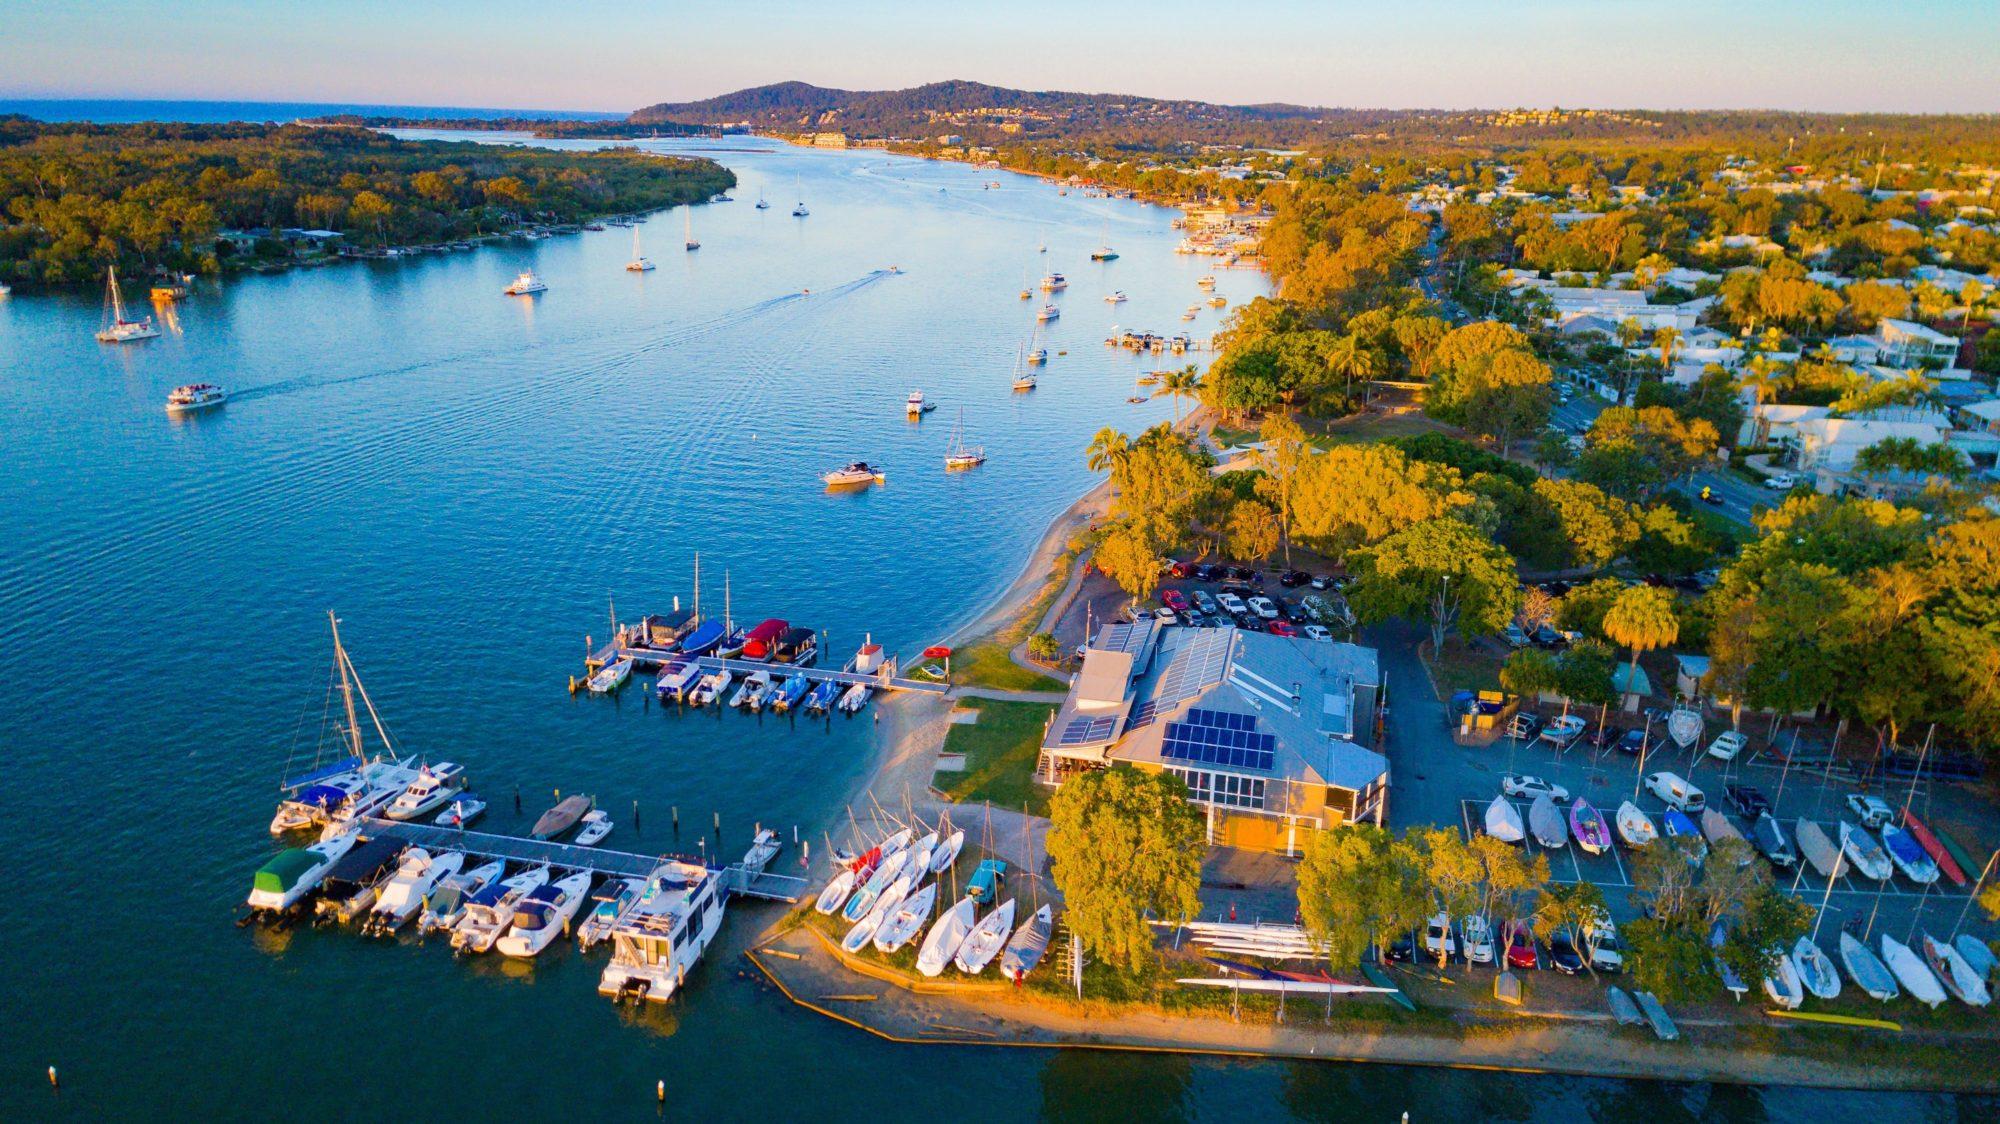 Visit the Noosa Yacht & Rowing Club or walk the river